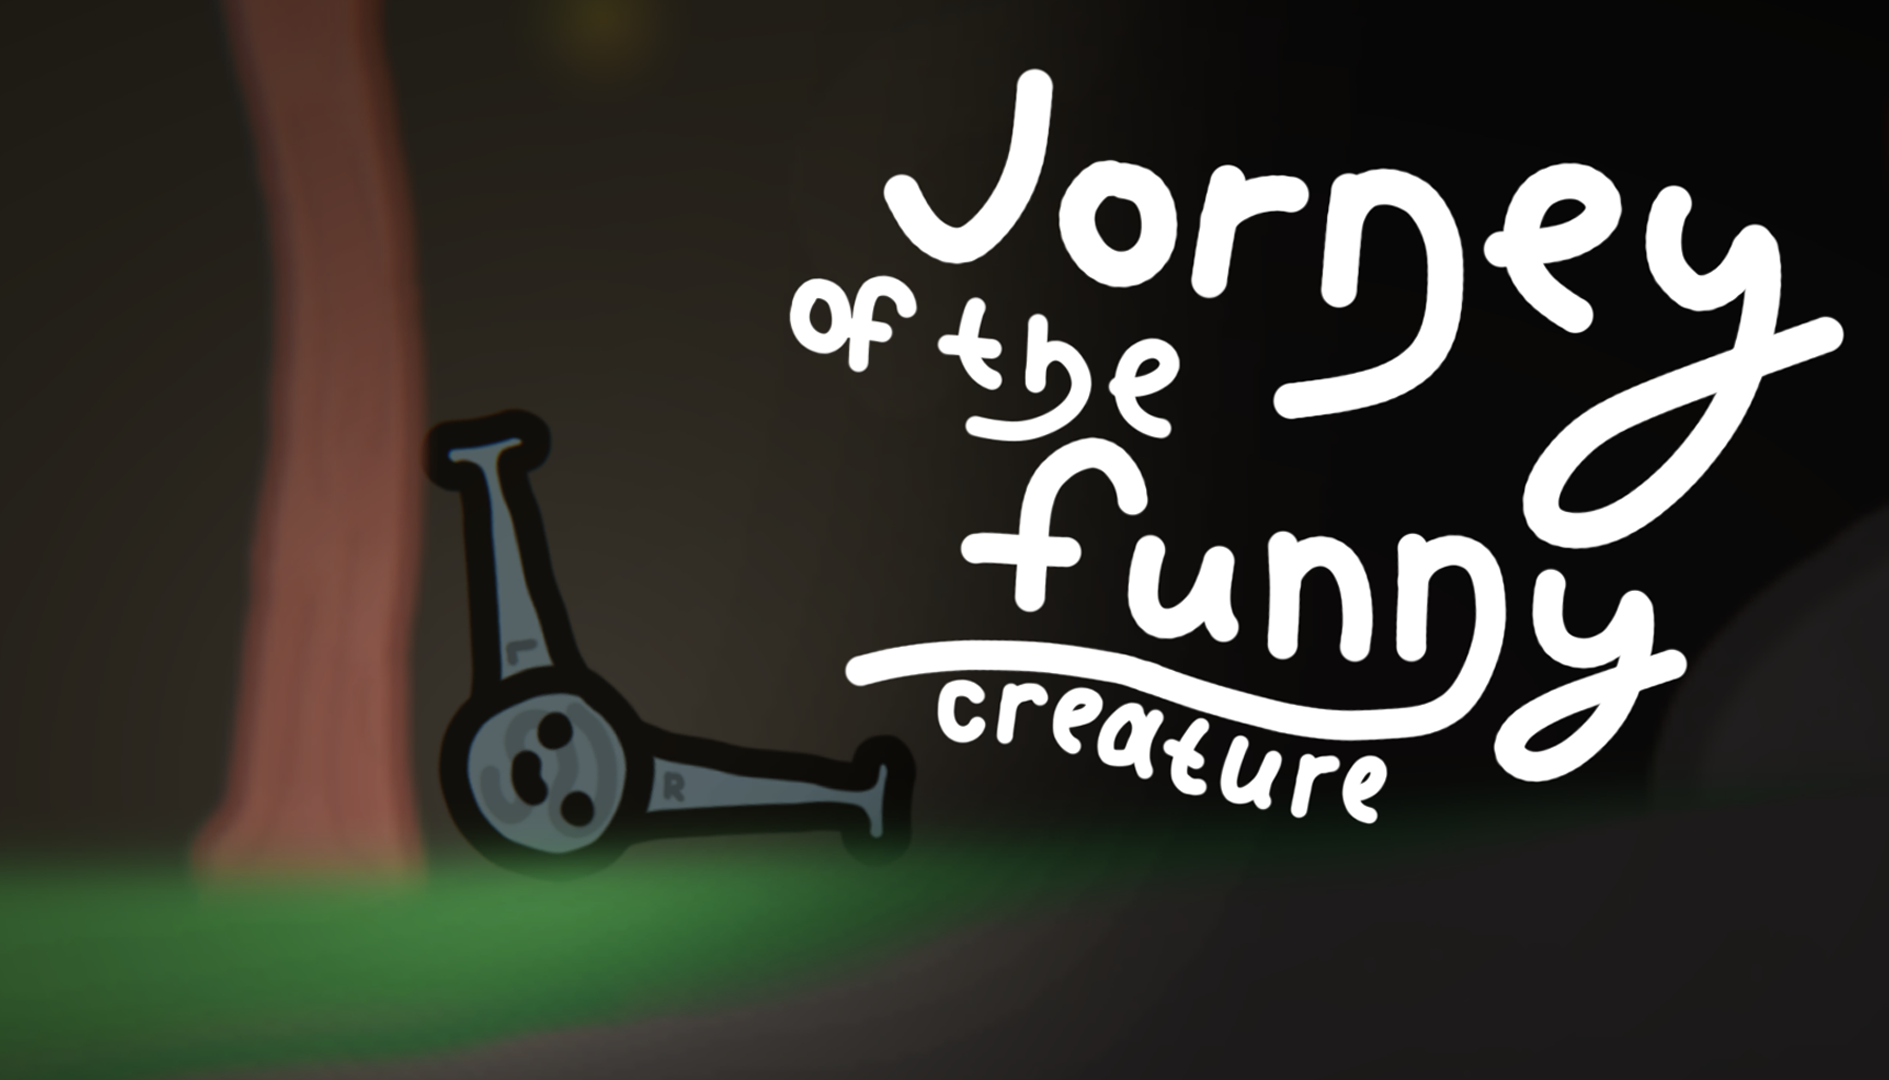 Journey of the funny creature